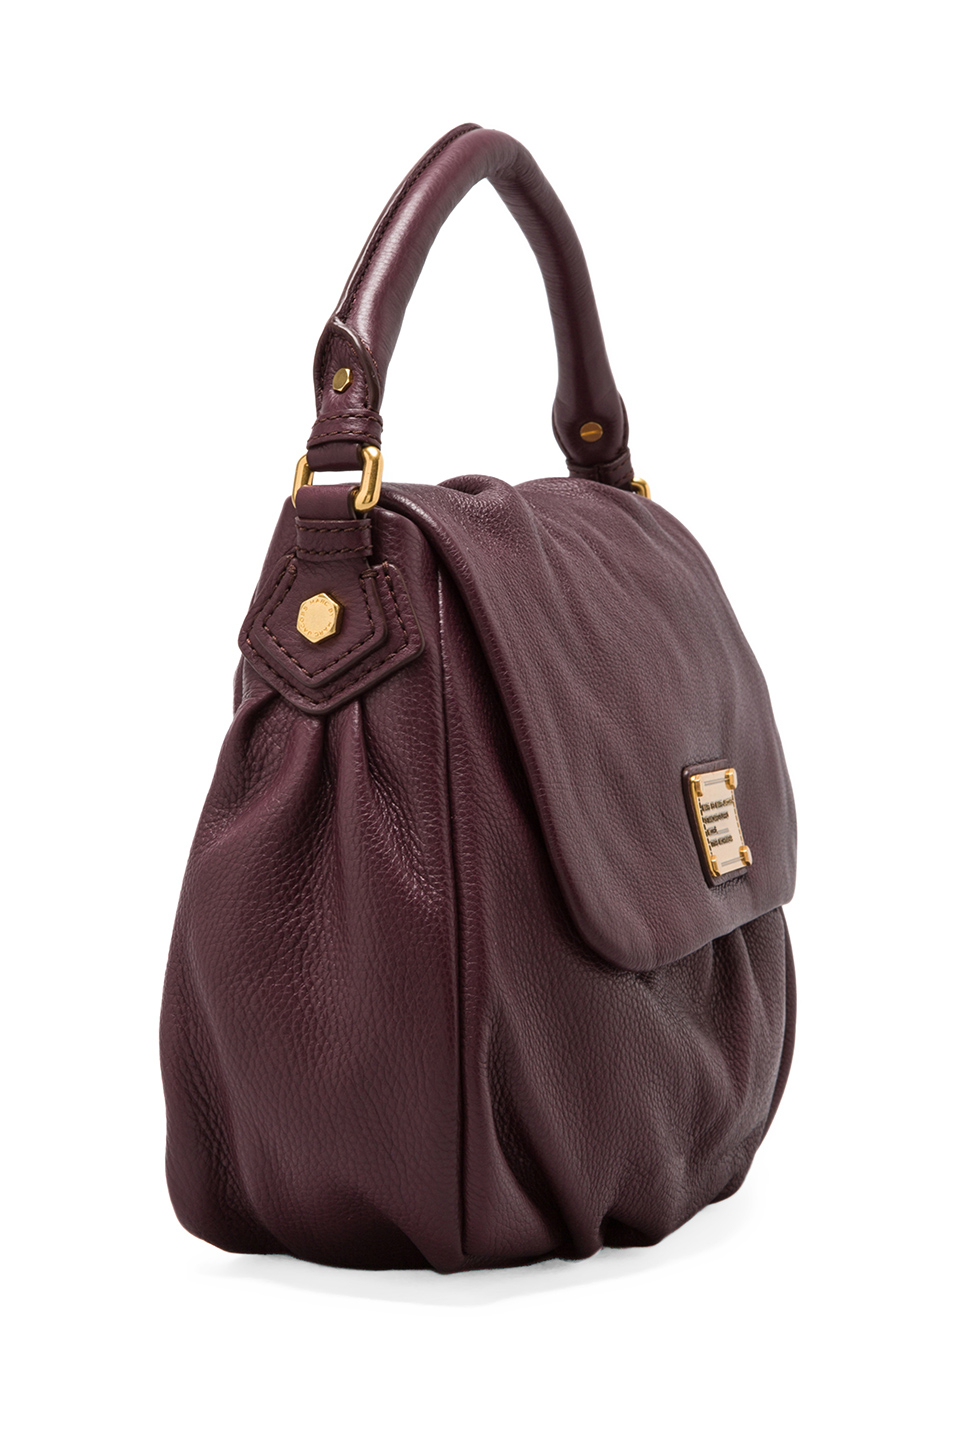 Marc By Marc Jacobs Classic Q Lil Ukita Shoulder Bag in Wine in Purple - Lyst